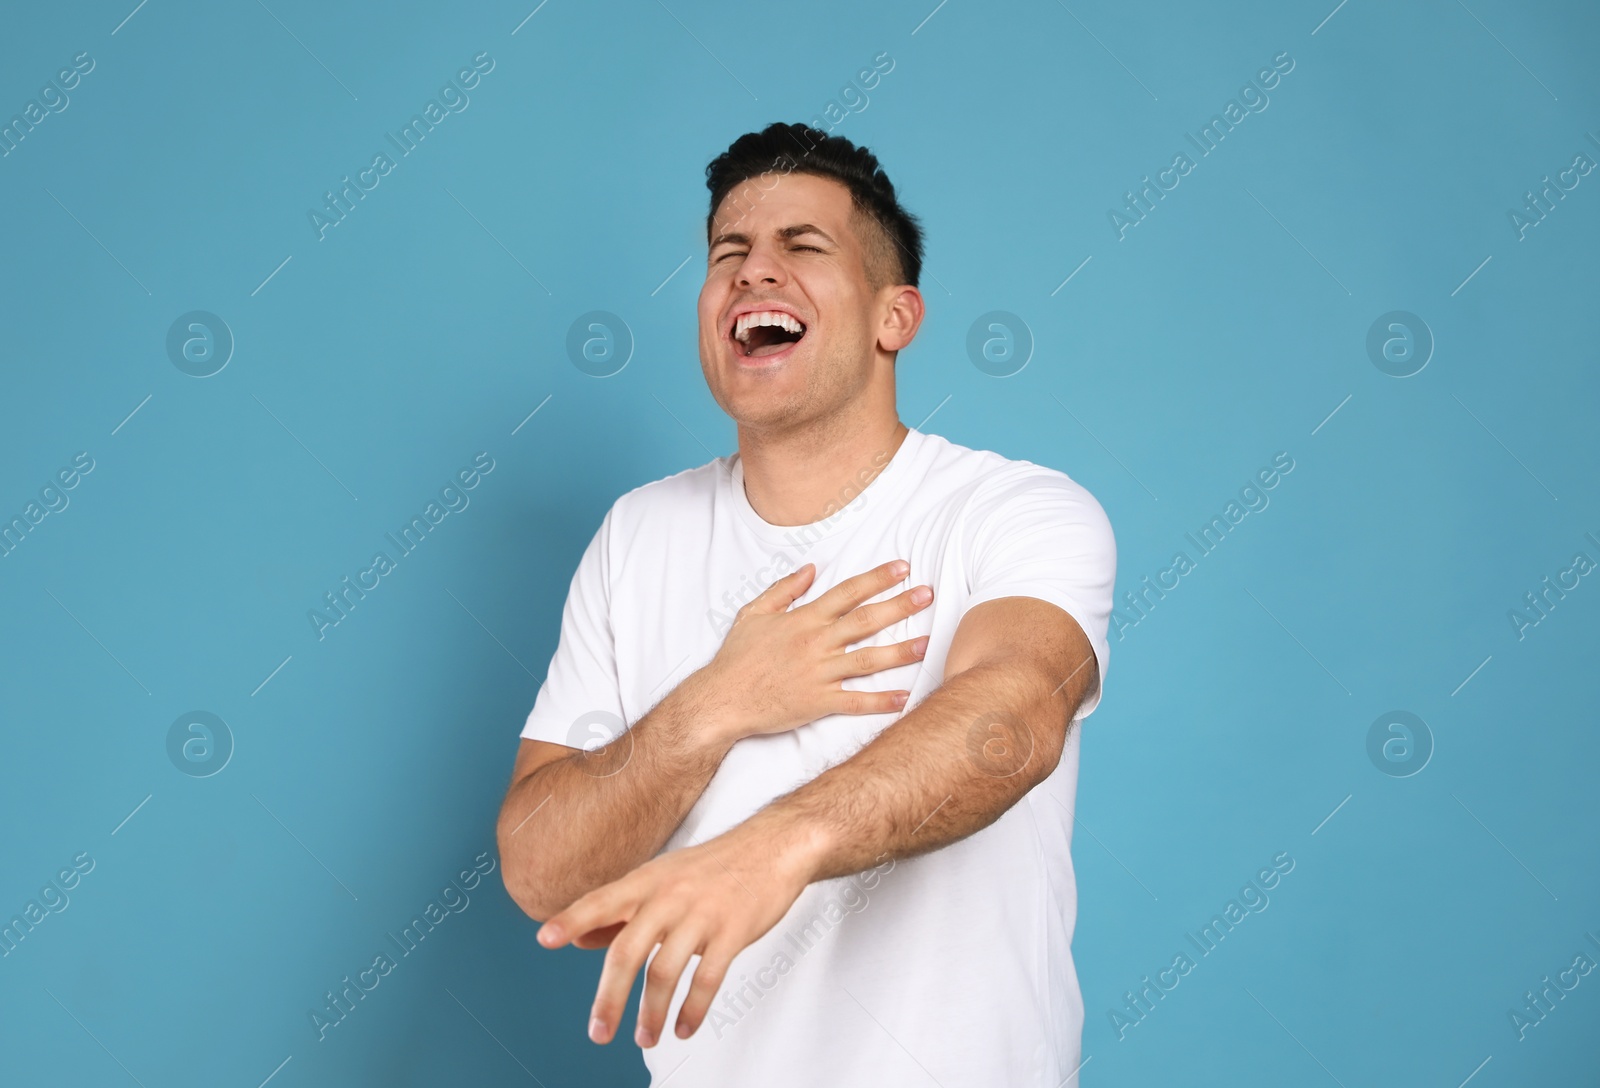 Photo of Handsome man laughing on light blue background. Funny joke